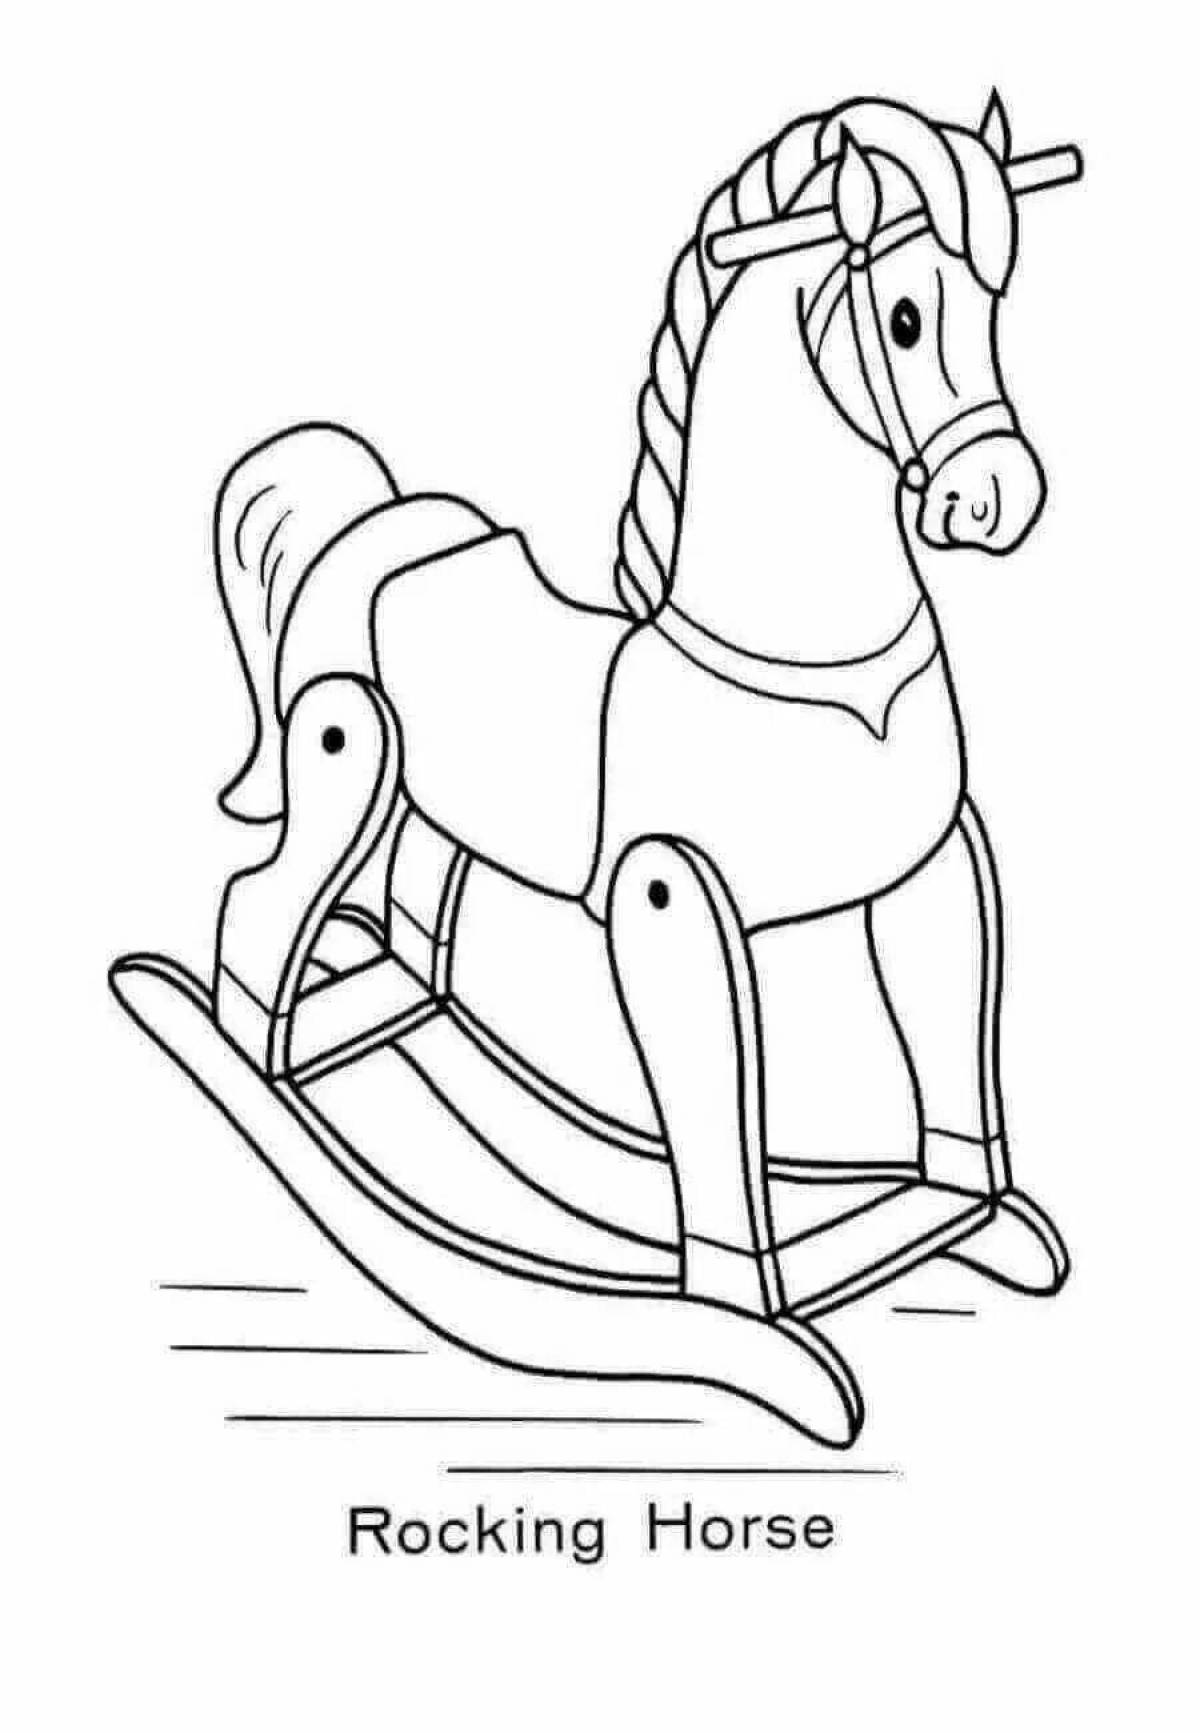 Exciting rocking horse coloring book for babies